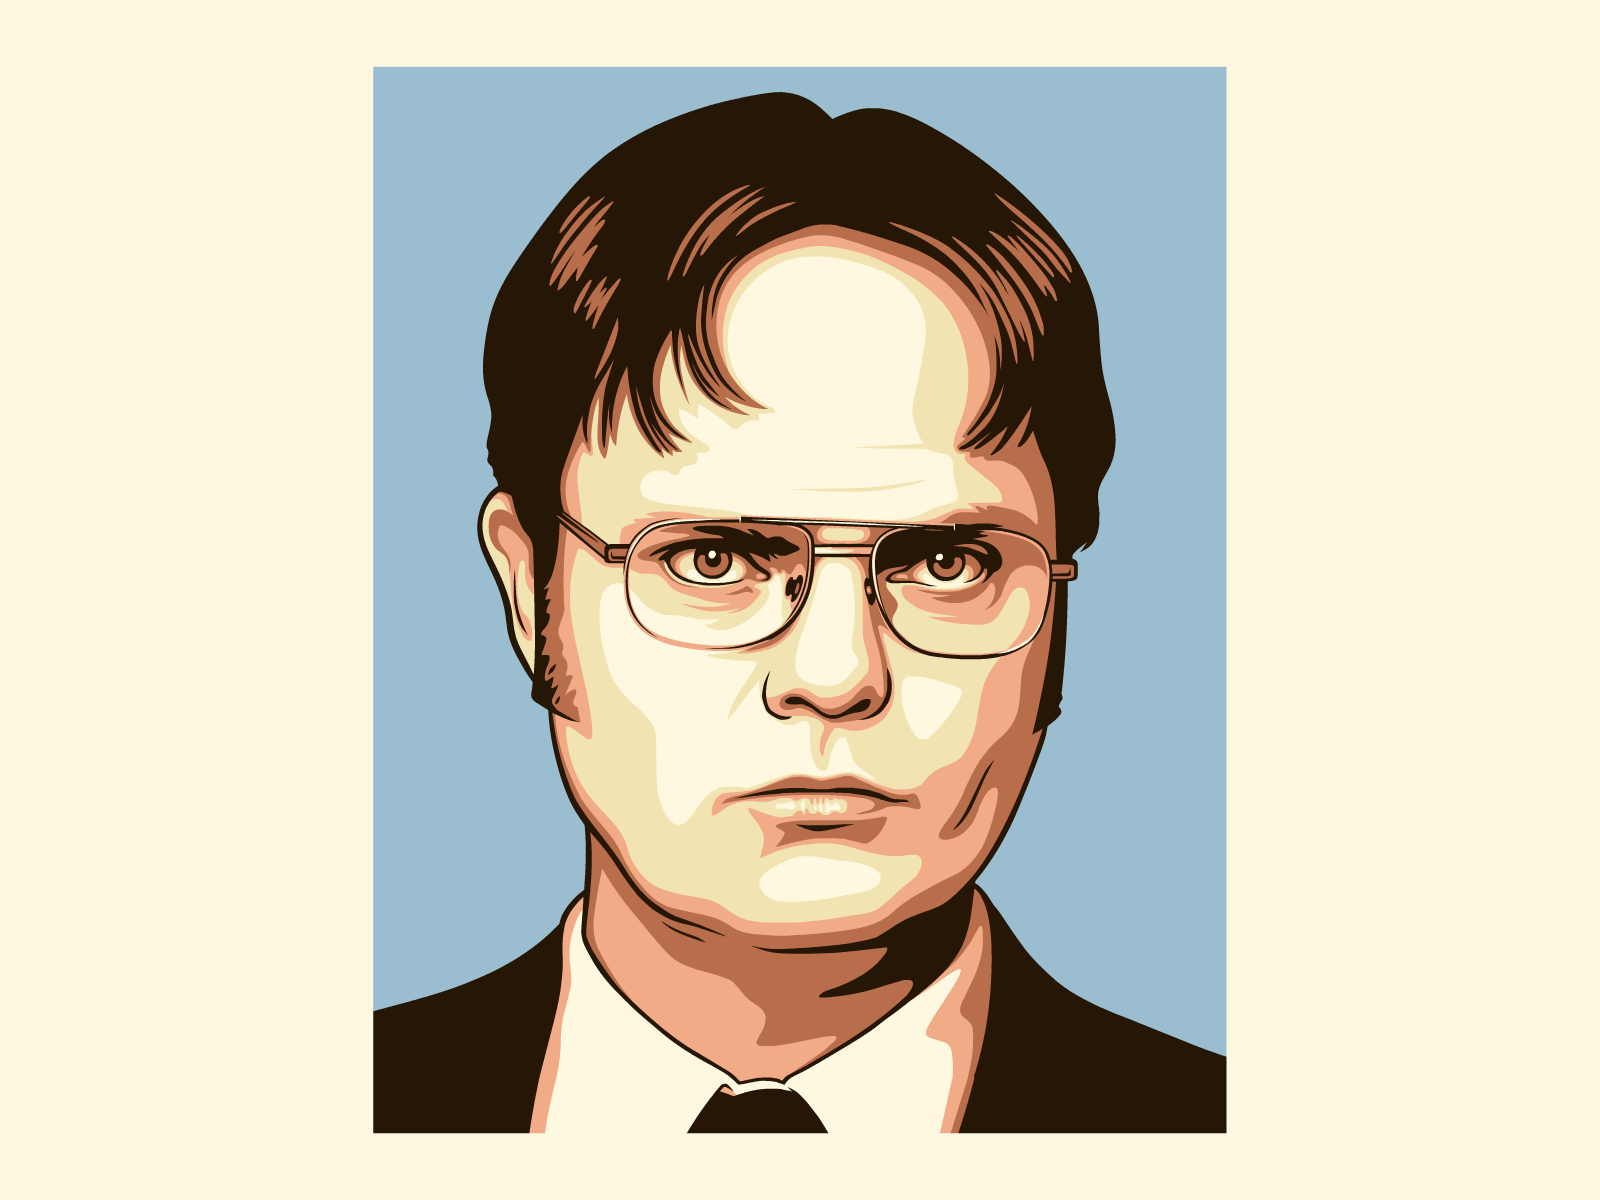 Dwight Schrute by Ed Booth on Dribbble